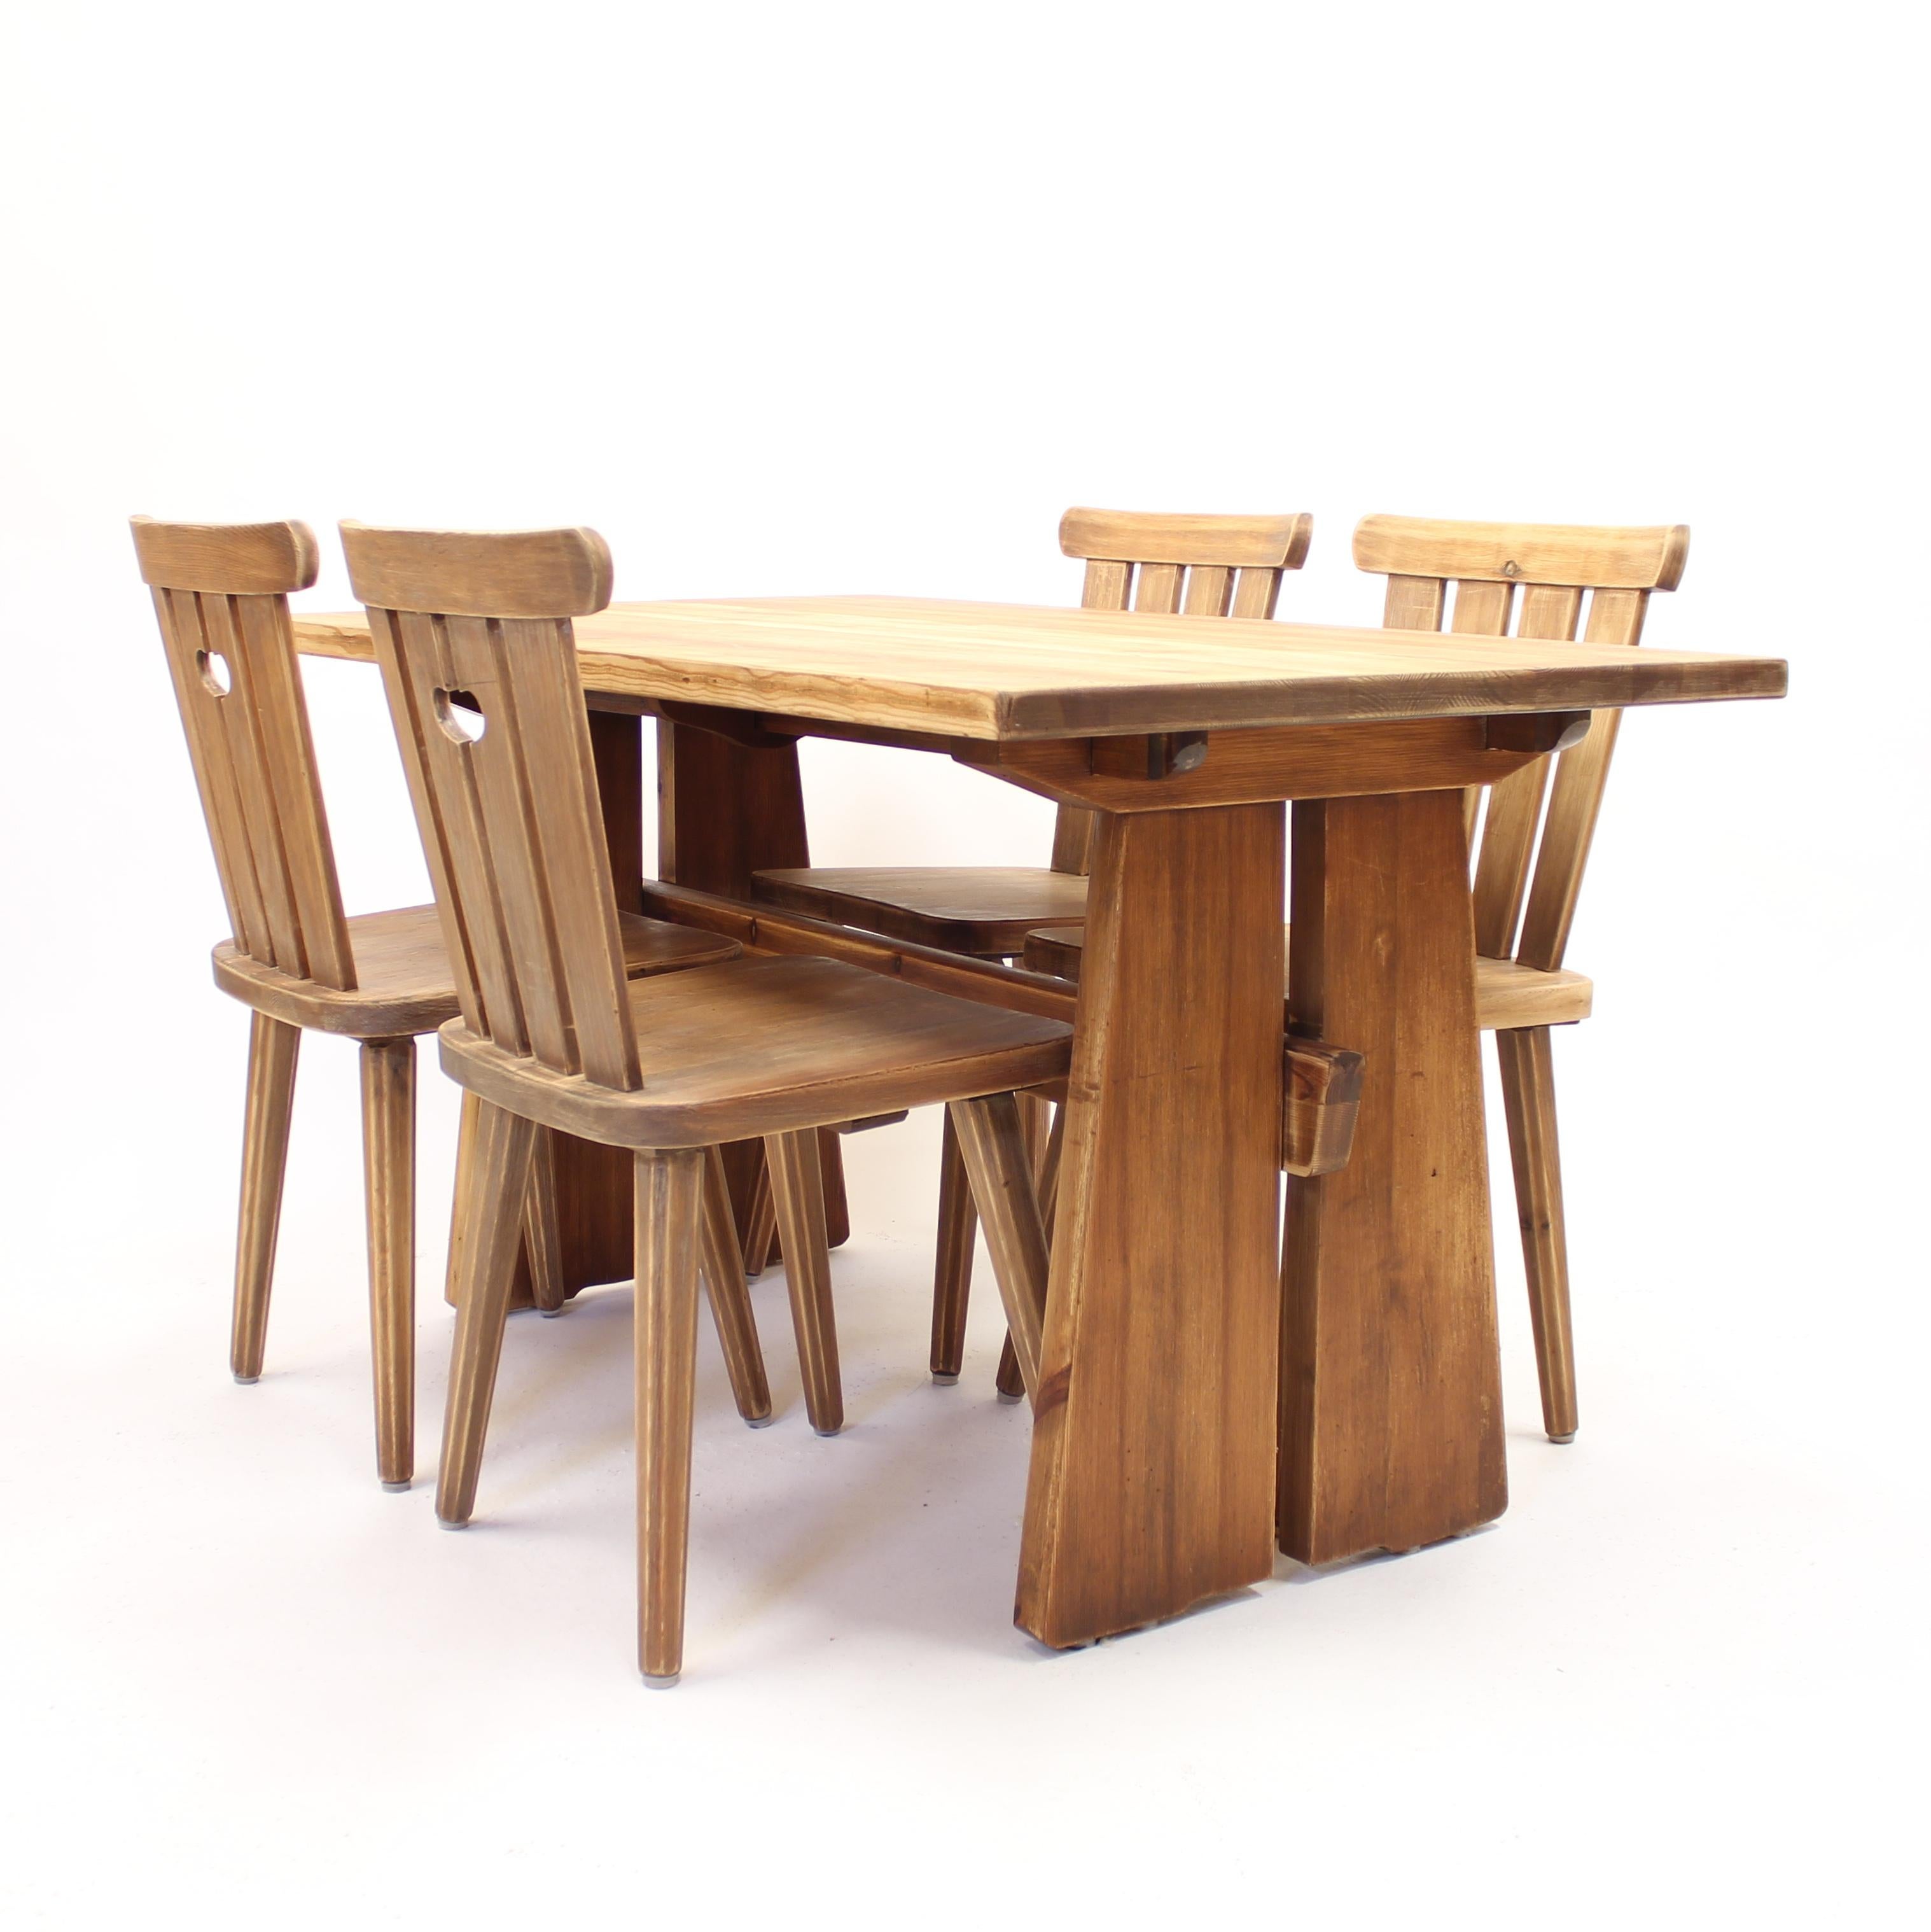 Swedish mid-century pine dining set including four chairs and a dining table with one extra leaf. A very typical so called 